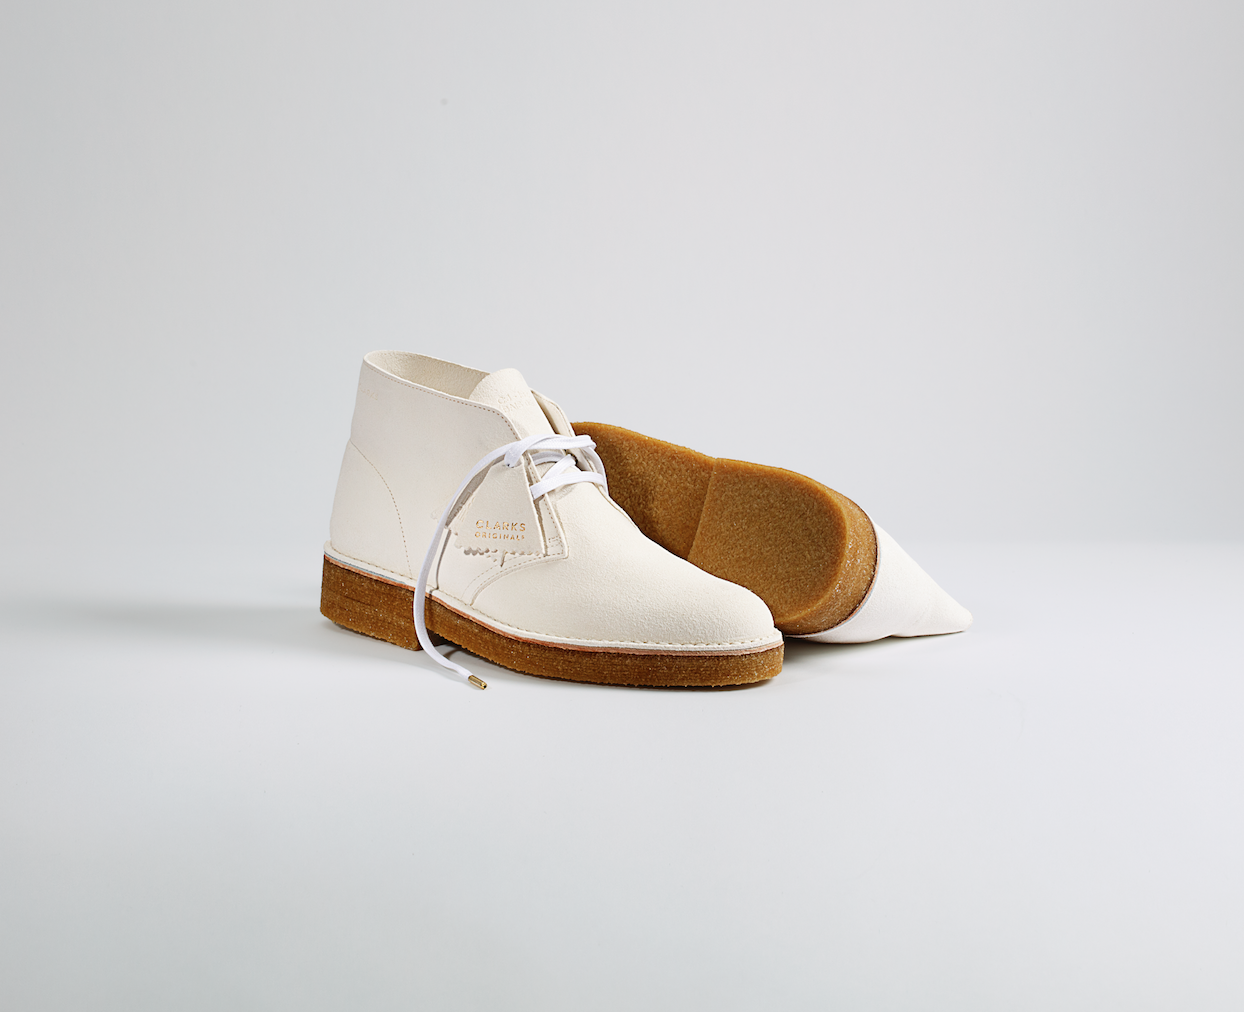 Clarks' Iconic Desert Boot Gets an Eco 